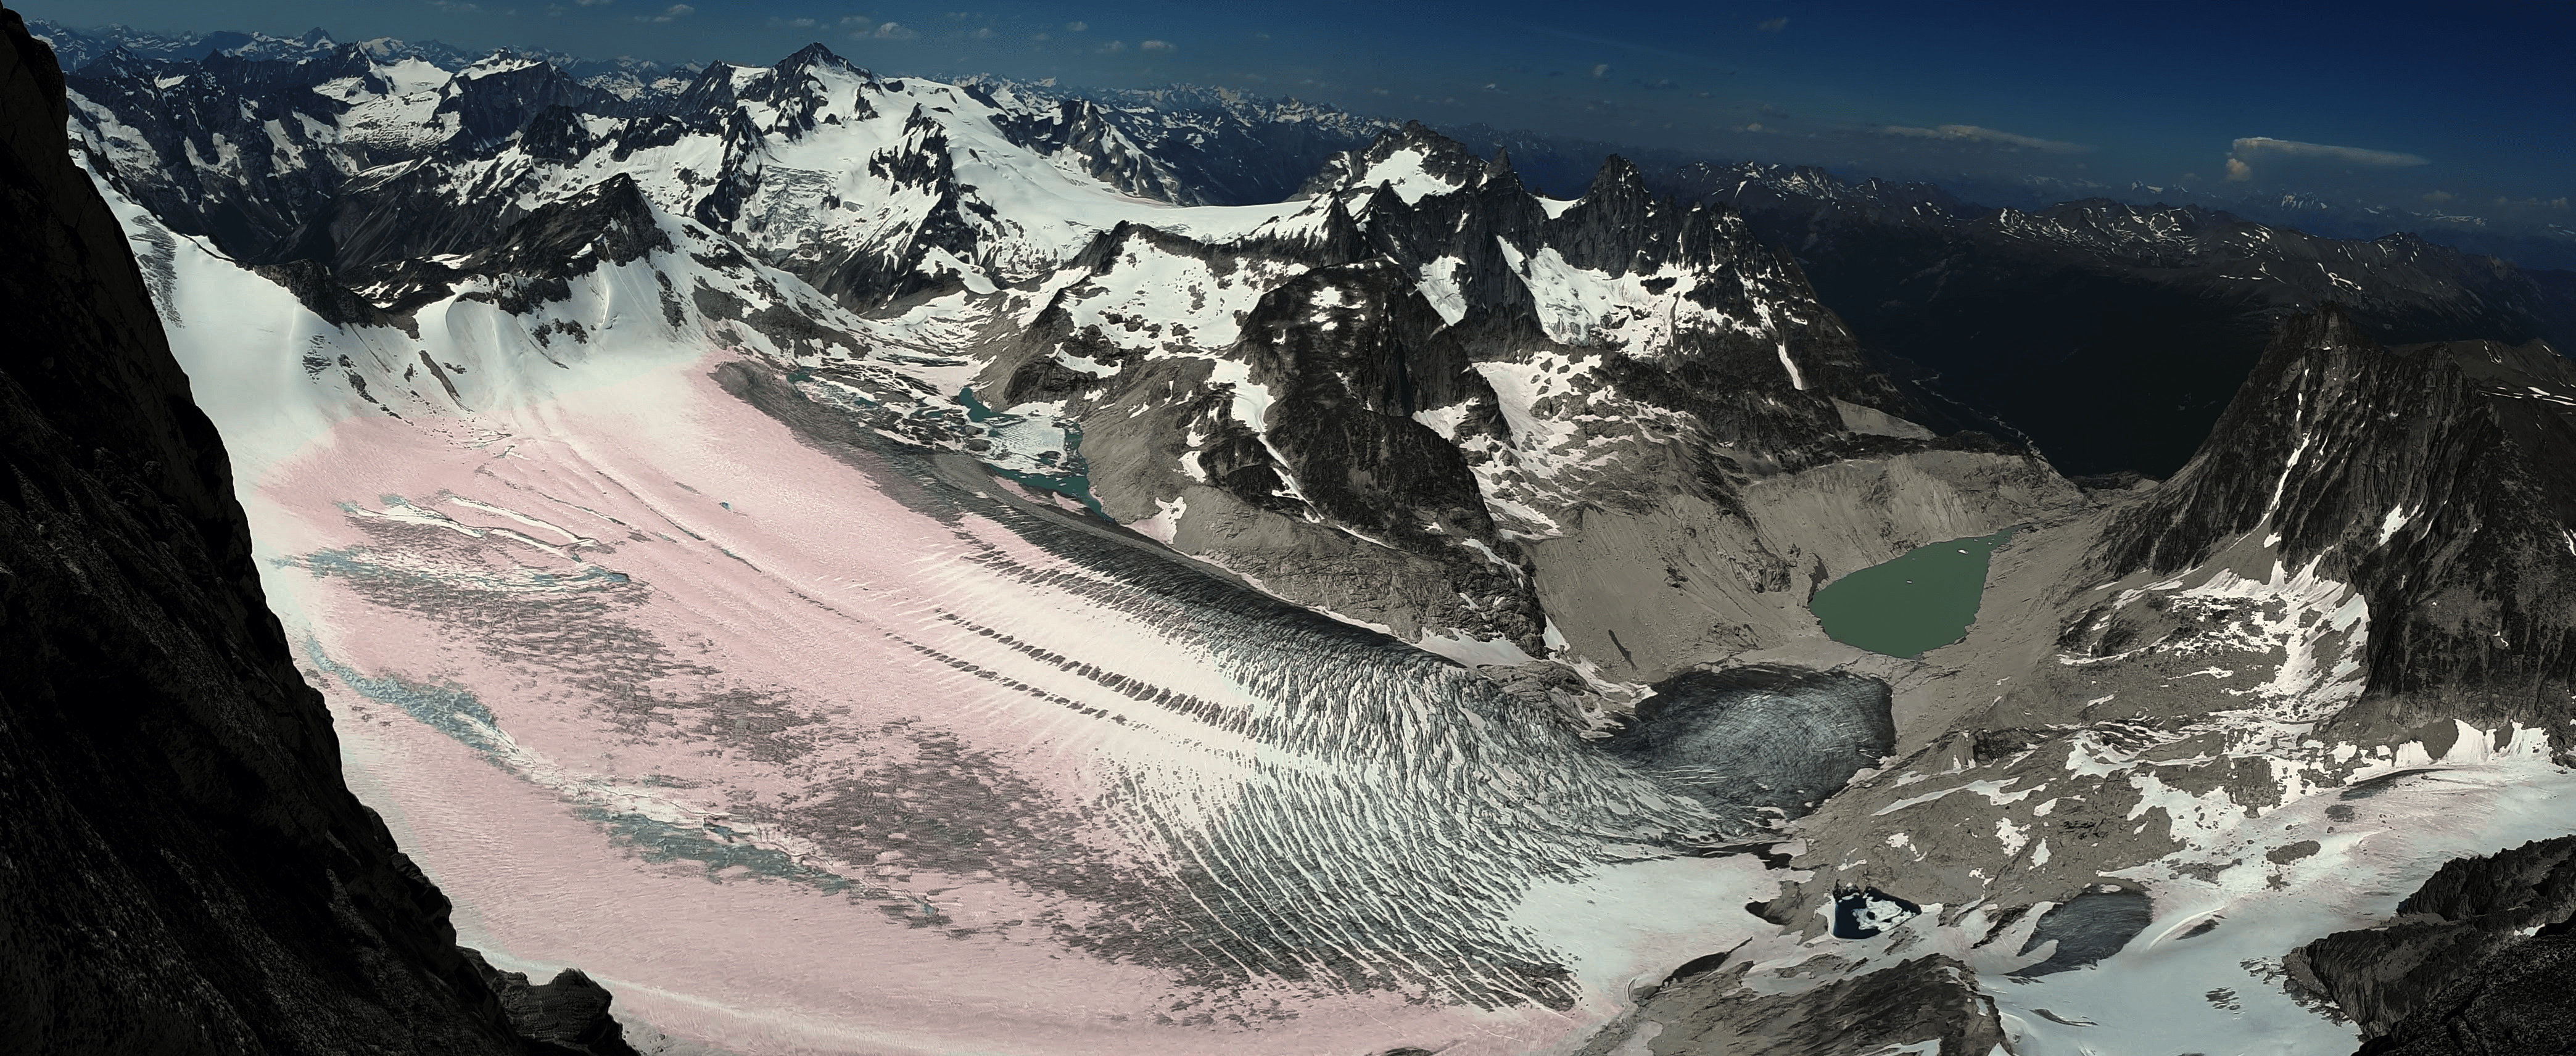 Pink Snow on the Vowell Glacier, Bugaboos, 2020